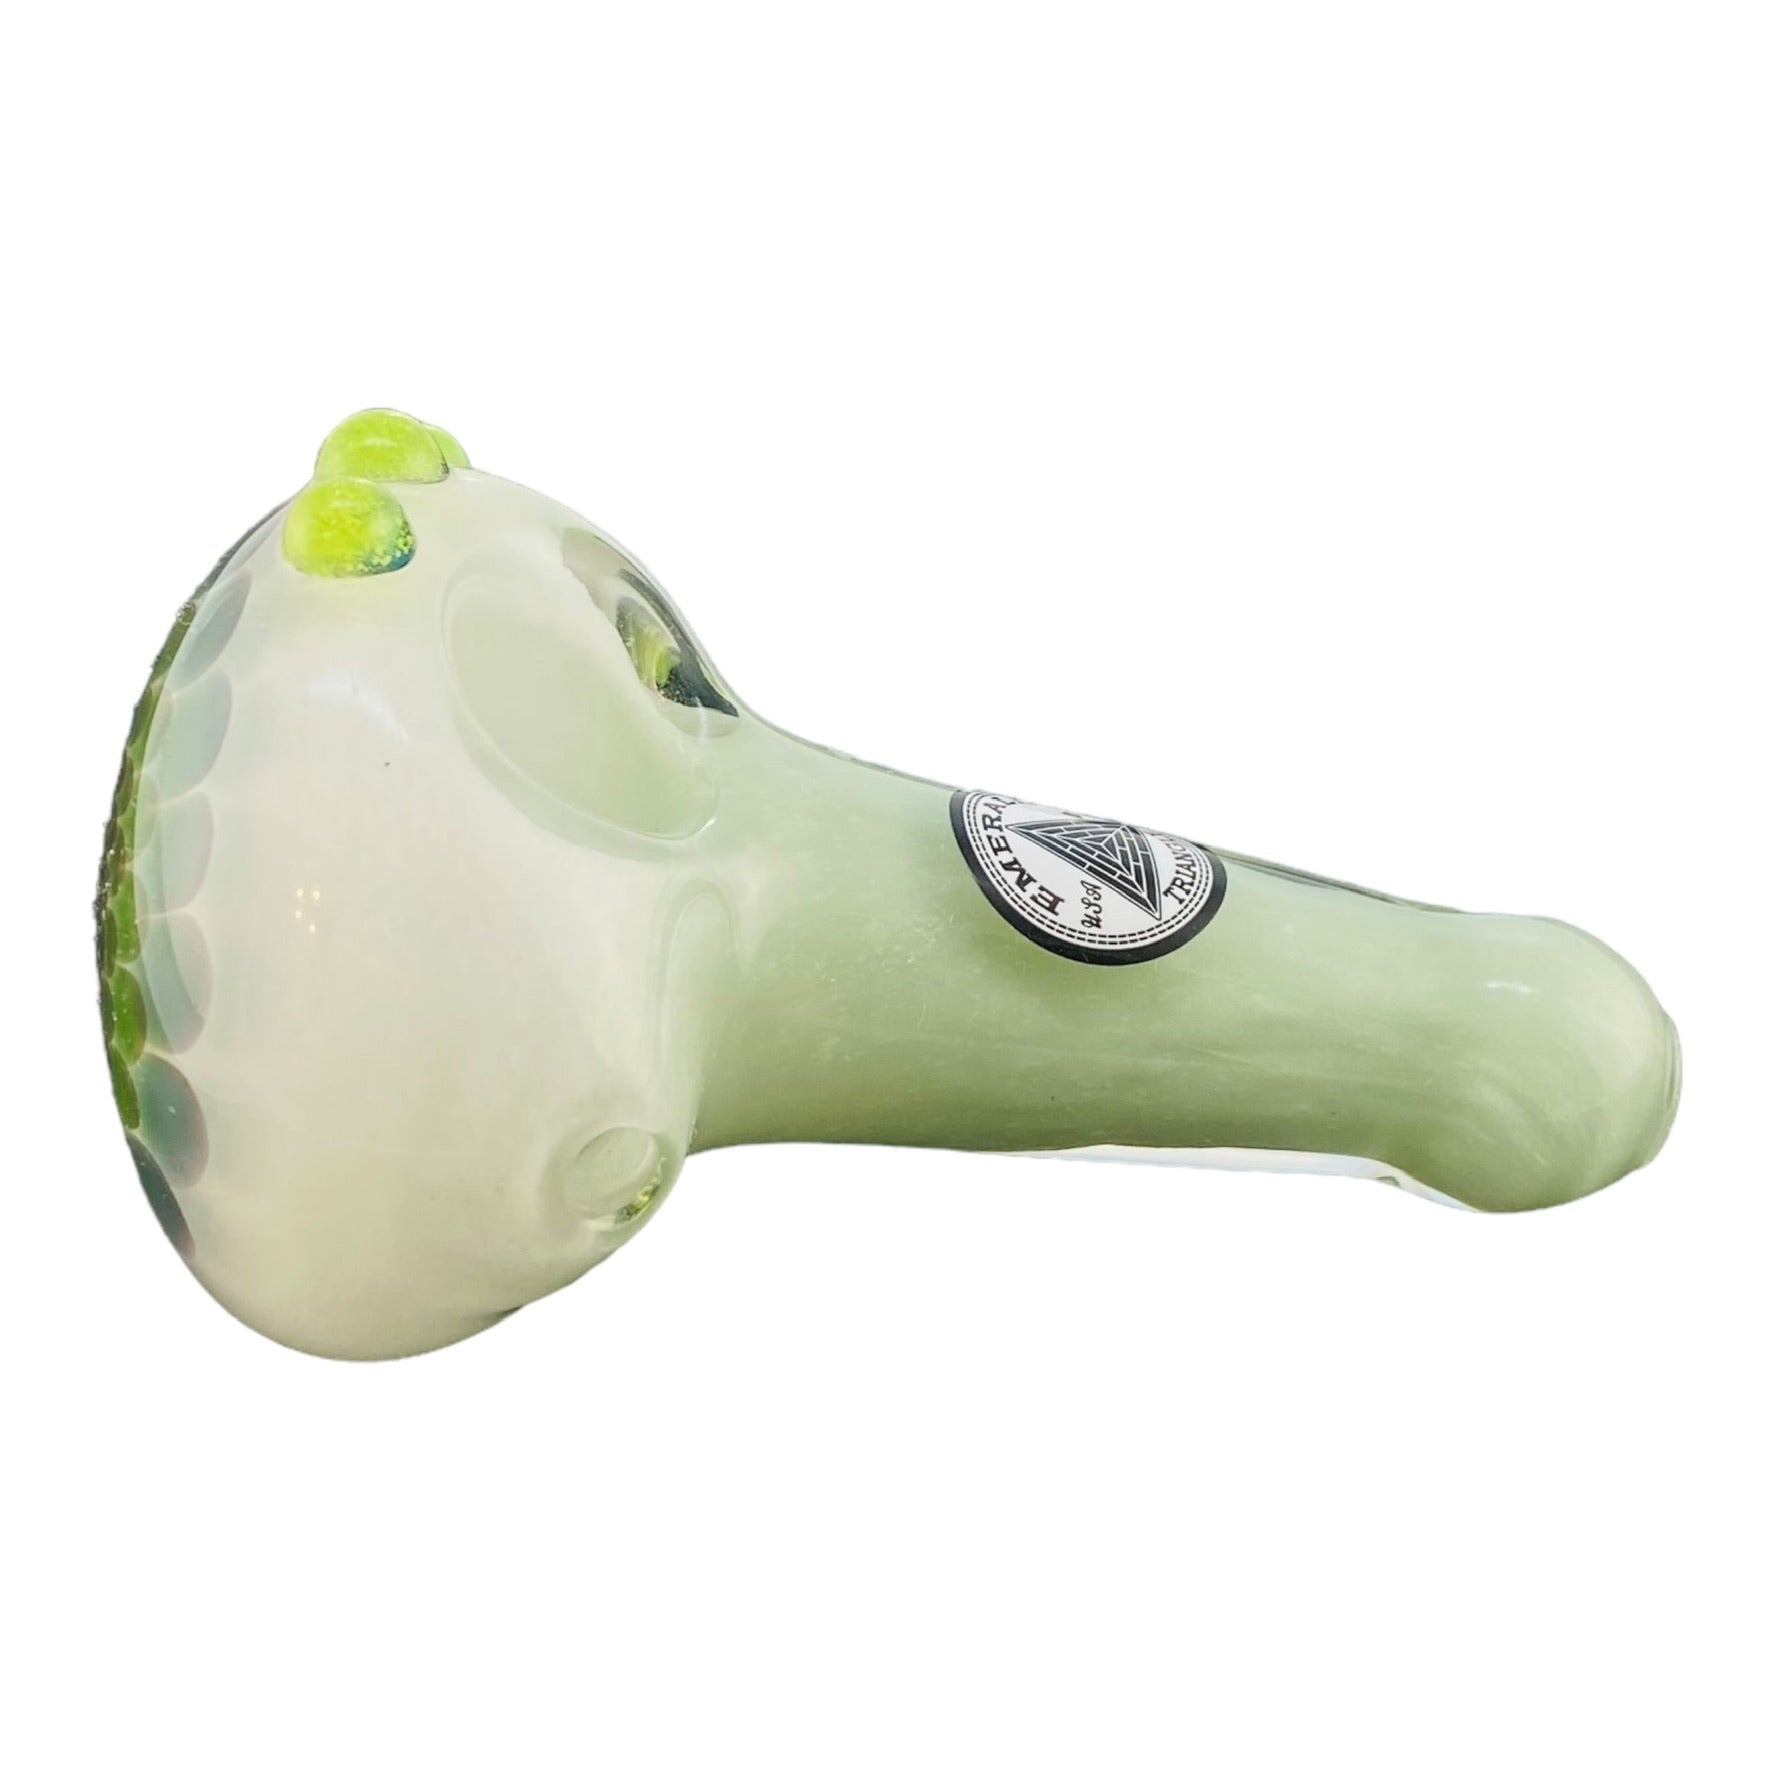 Emerald Triangle Glass - Glass Hand Pipe - Sea Foam Green With Dot Stack End 